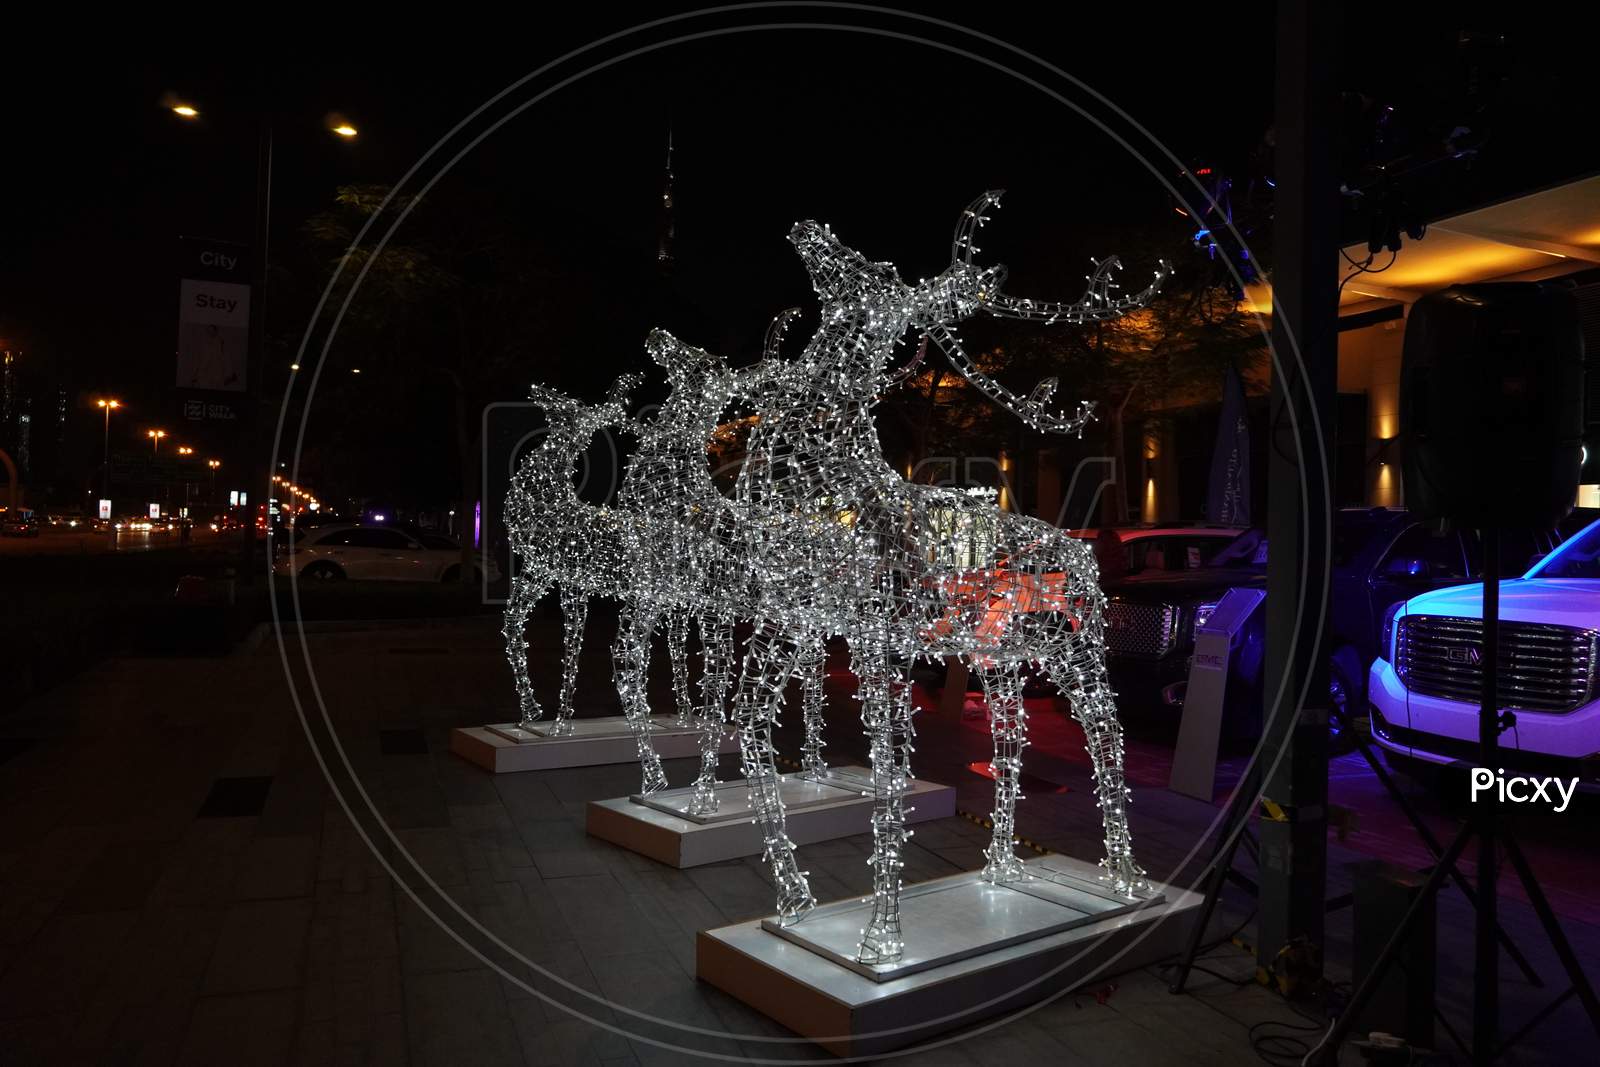 Glowing Reindeer Made Of Wire And Light Bulbs. Christmas Decorations. Christmas Lights On Reindeer Shape Wire Frame Mesh. Deer Christmas Outdoor Decoration. Decorative Lights- Dubai Uae December 2019